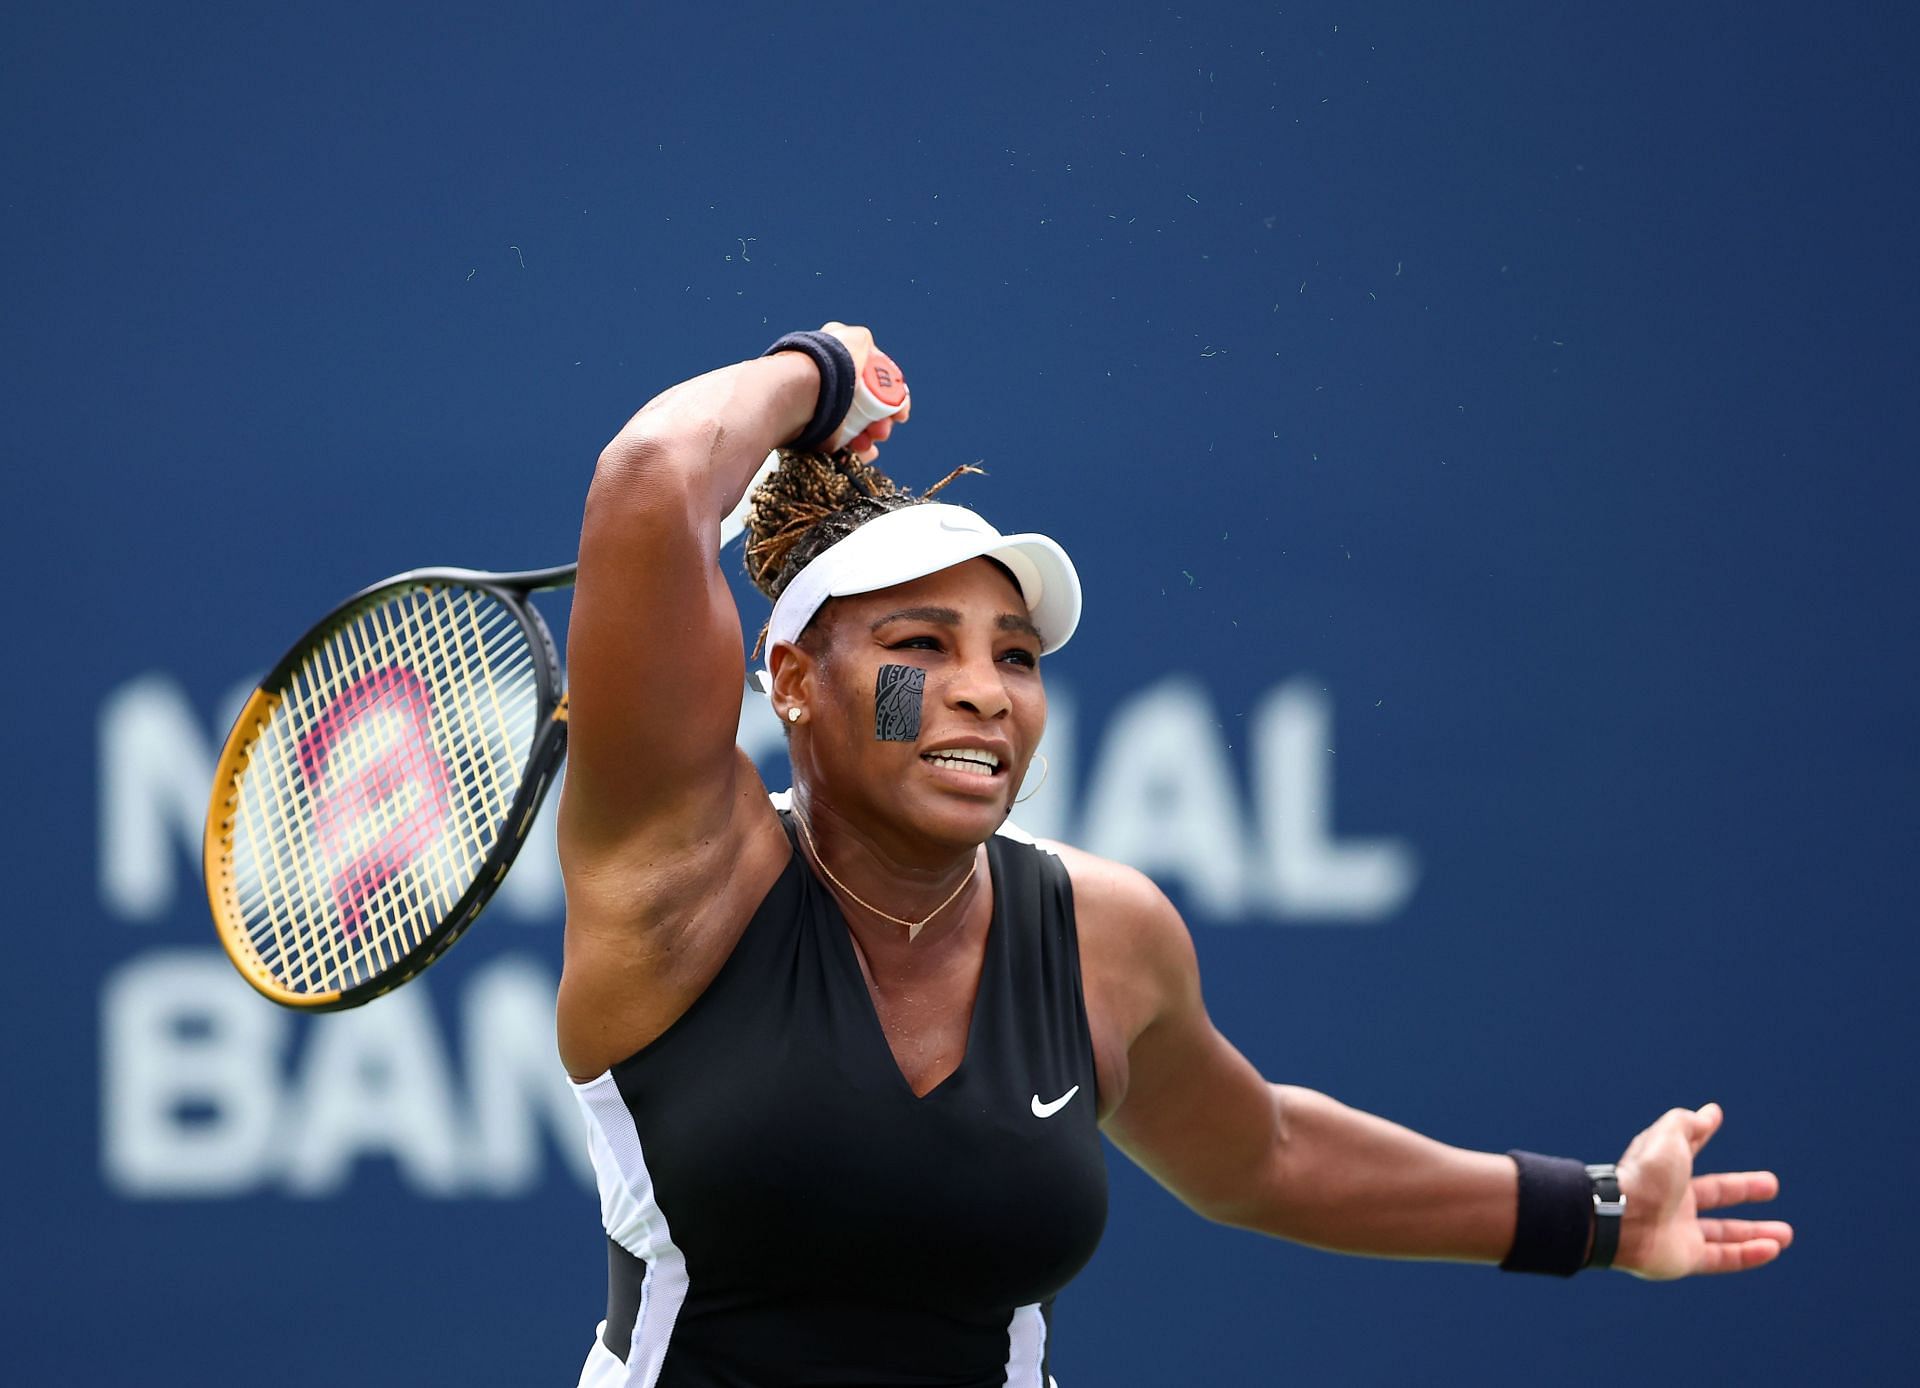 Serena Williams in action at the Canadian Open